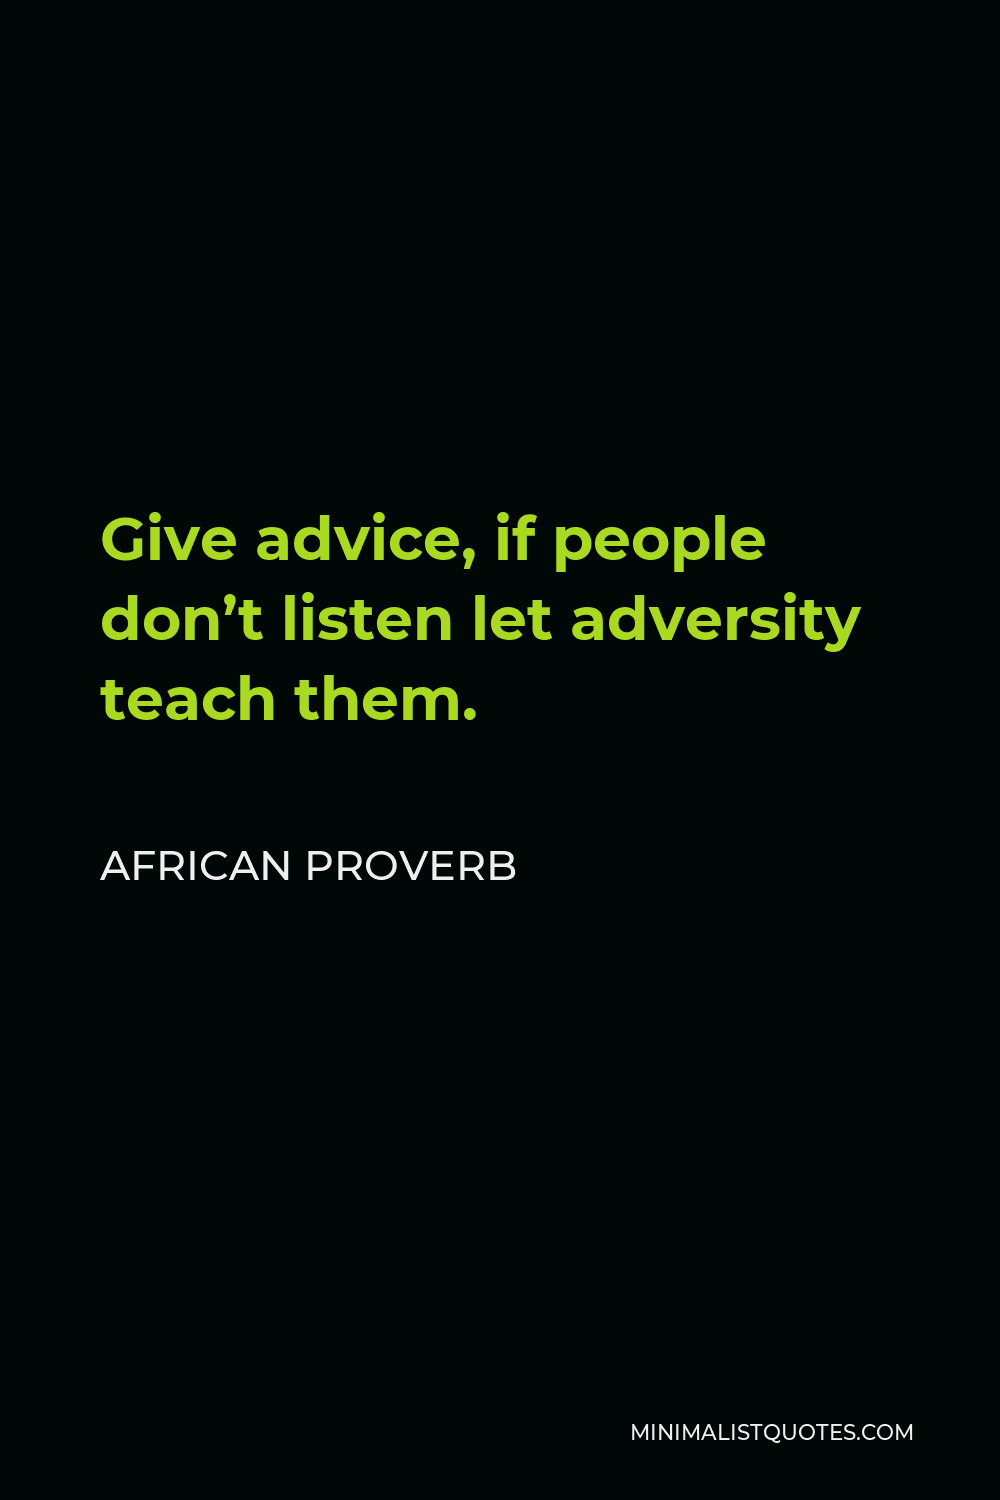 African Proverb Quote - Give advice, if people don’t listen let adversity teach them.